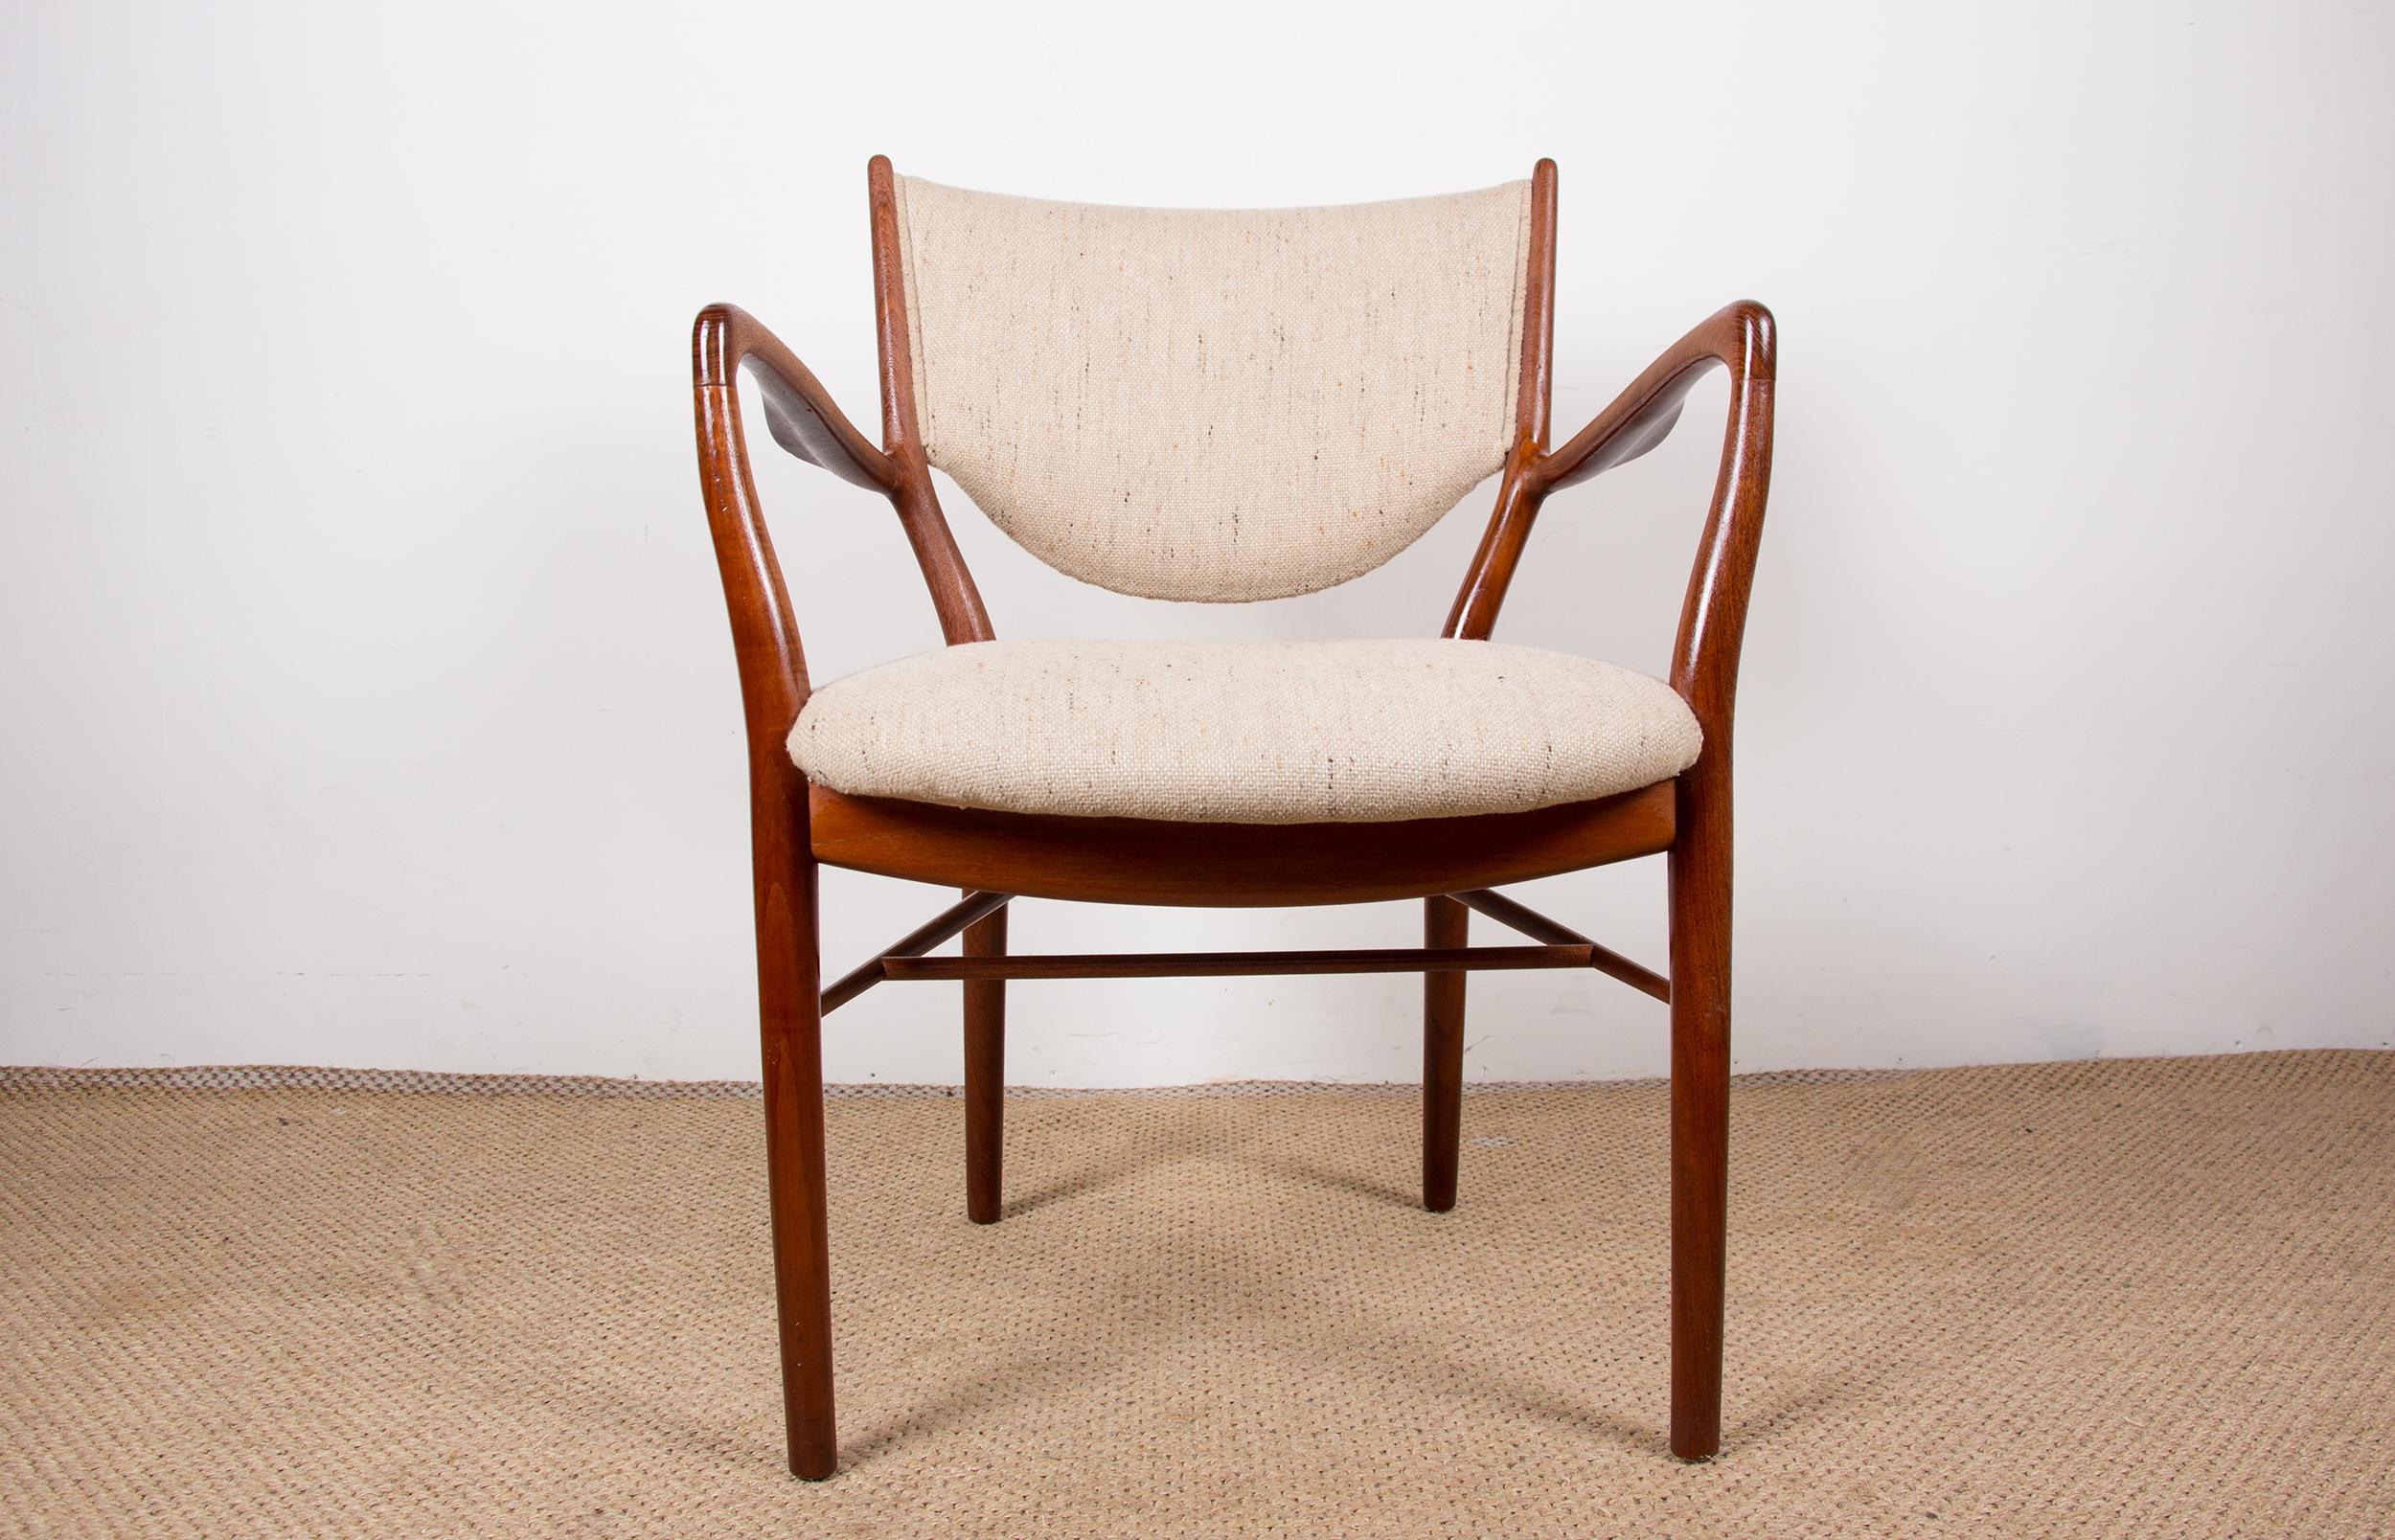 Exceptional Scandinavian armchair. Considered one of Finn Juhl's masterpieces, the NV46 armchair was first presented in 1946 and, in teak wood, was only ever made by Niels Vodder. Remarkable woodworking, Design of rare elegance.